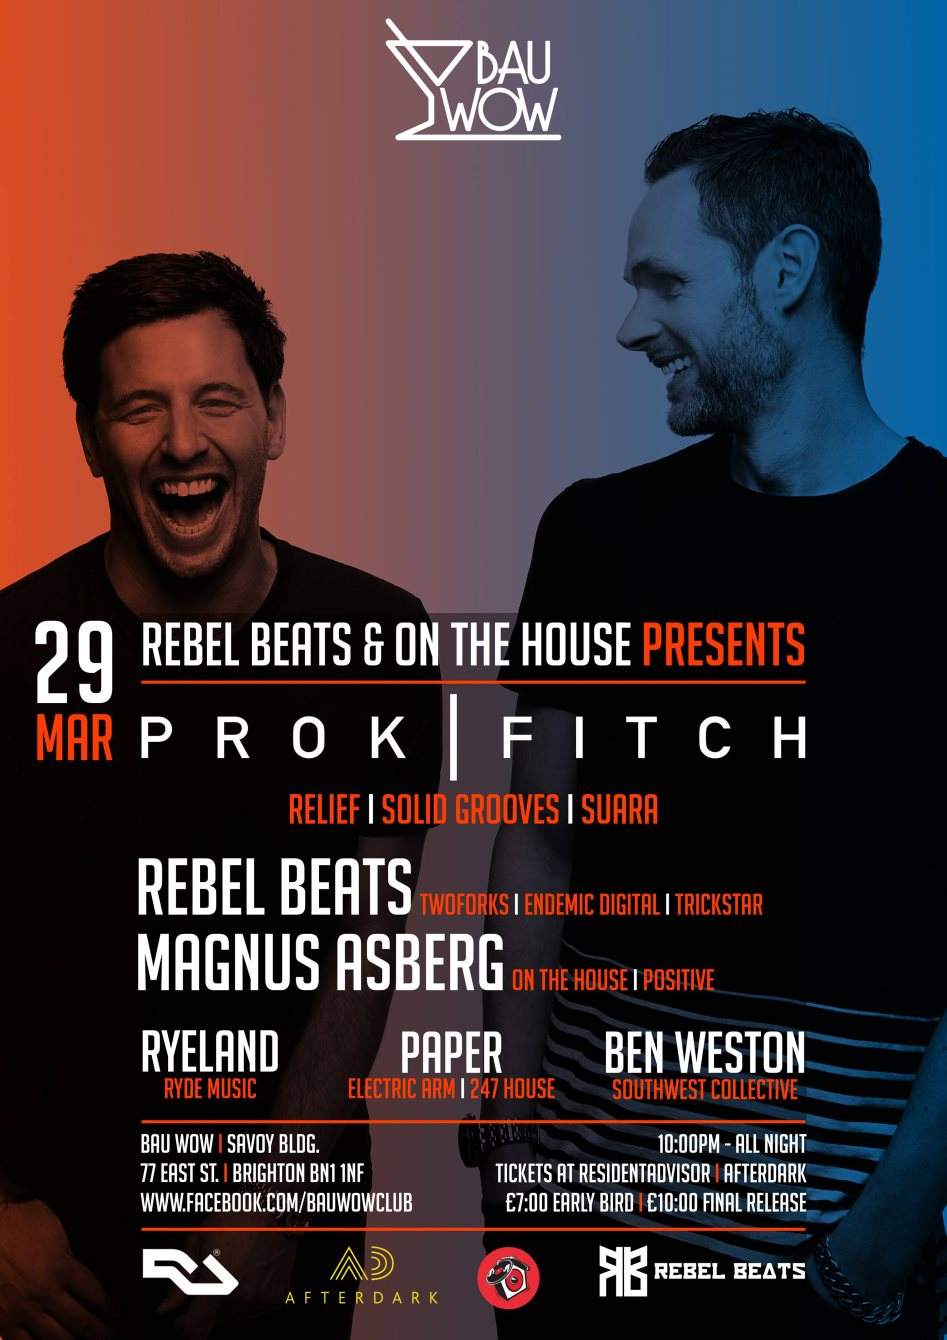 Rebel Beats & On the House presents: Prok & Fitch - フライヤー表